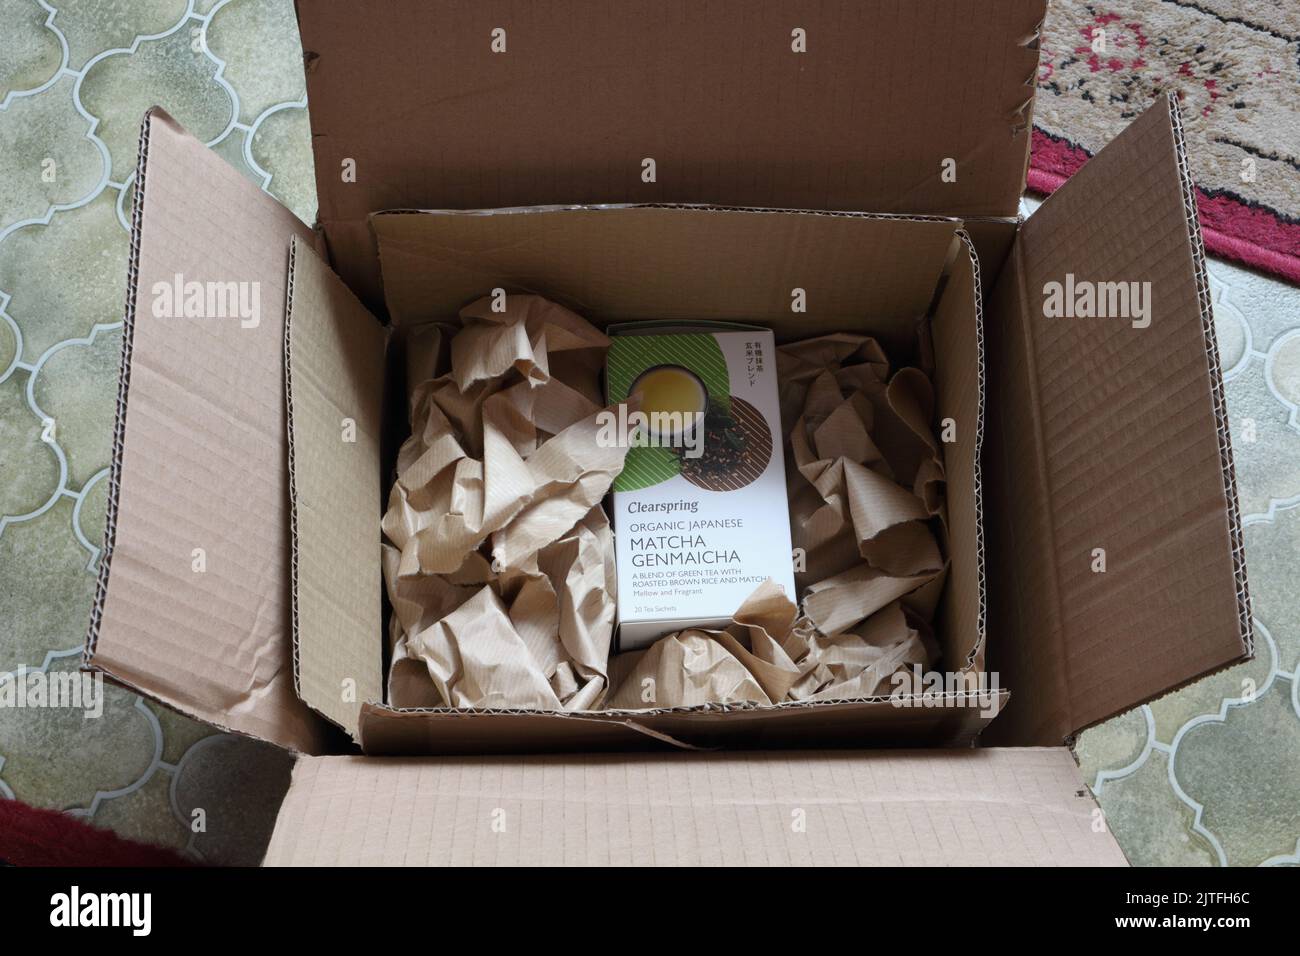 Item in overpackaged cardboard boxes. Environmentally unfriendly excess packaging Stock Photo